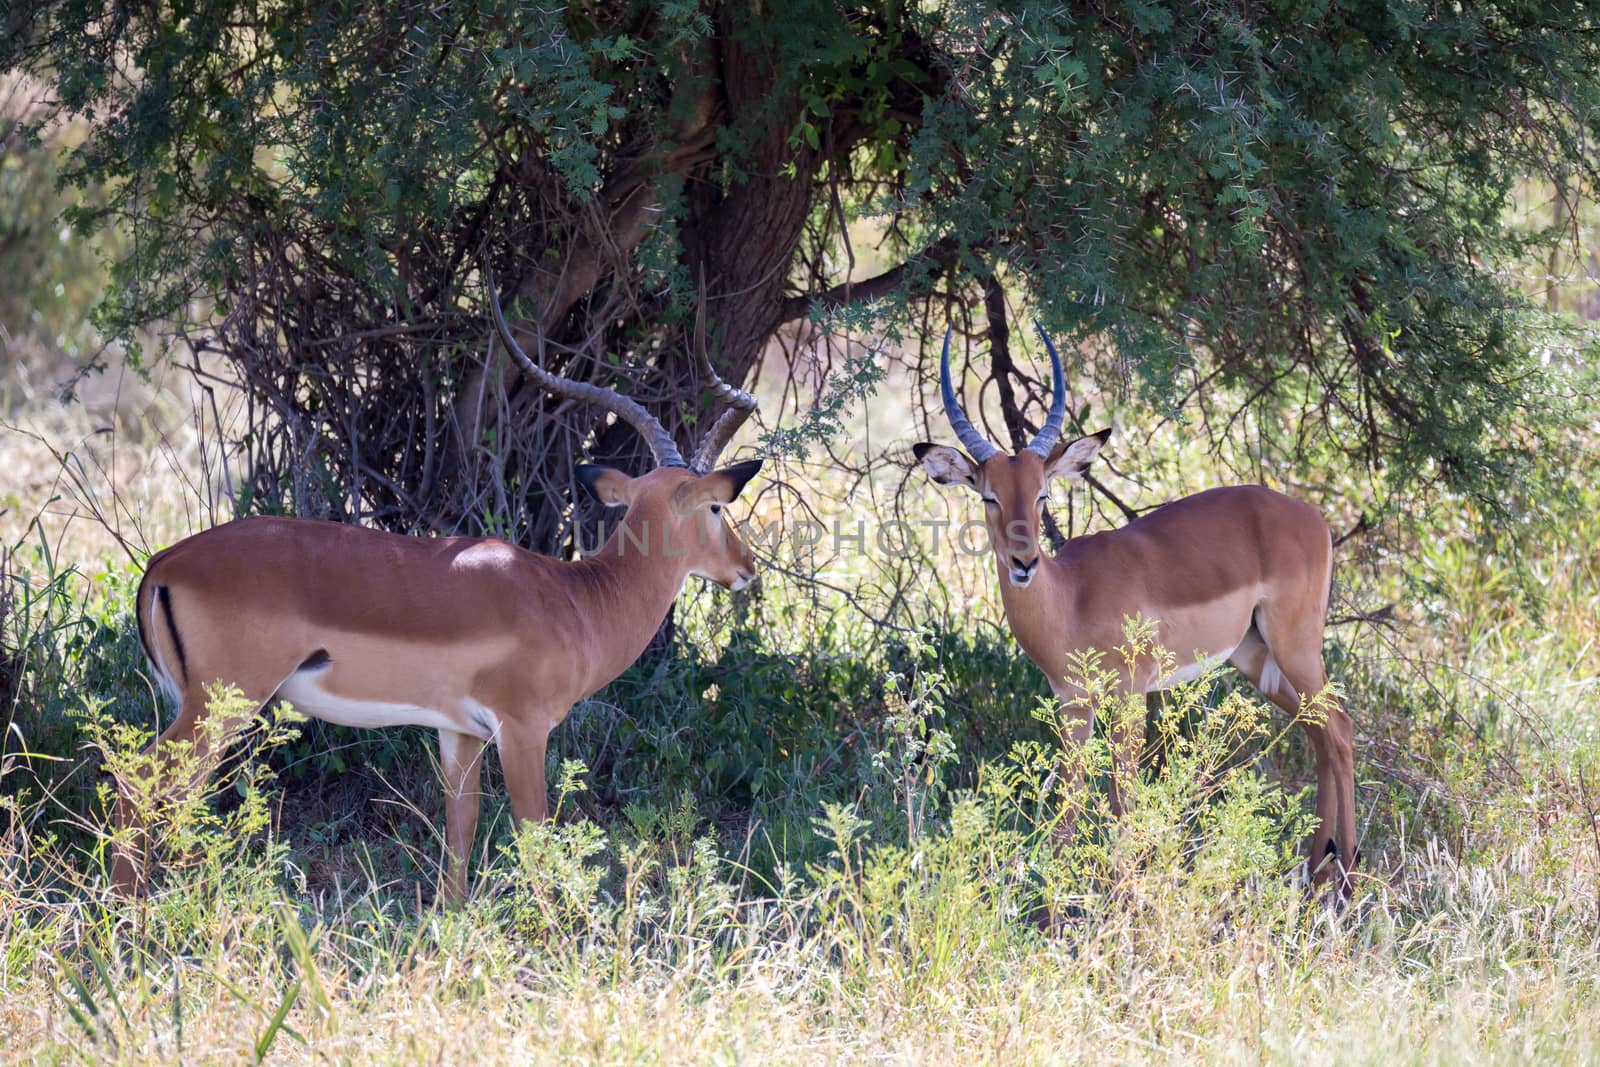 A native species of antelope in the meadow